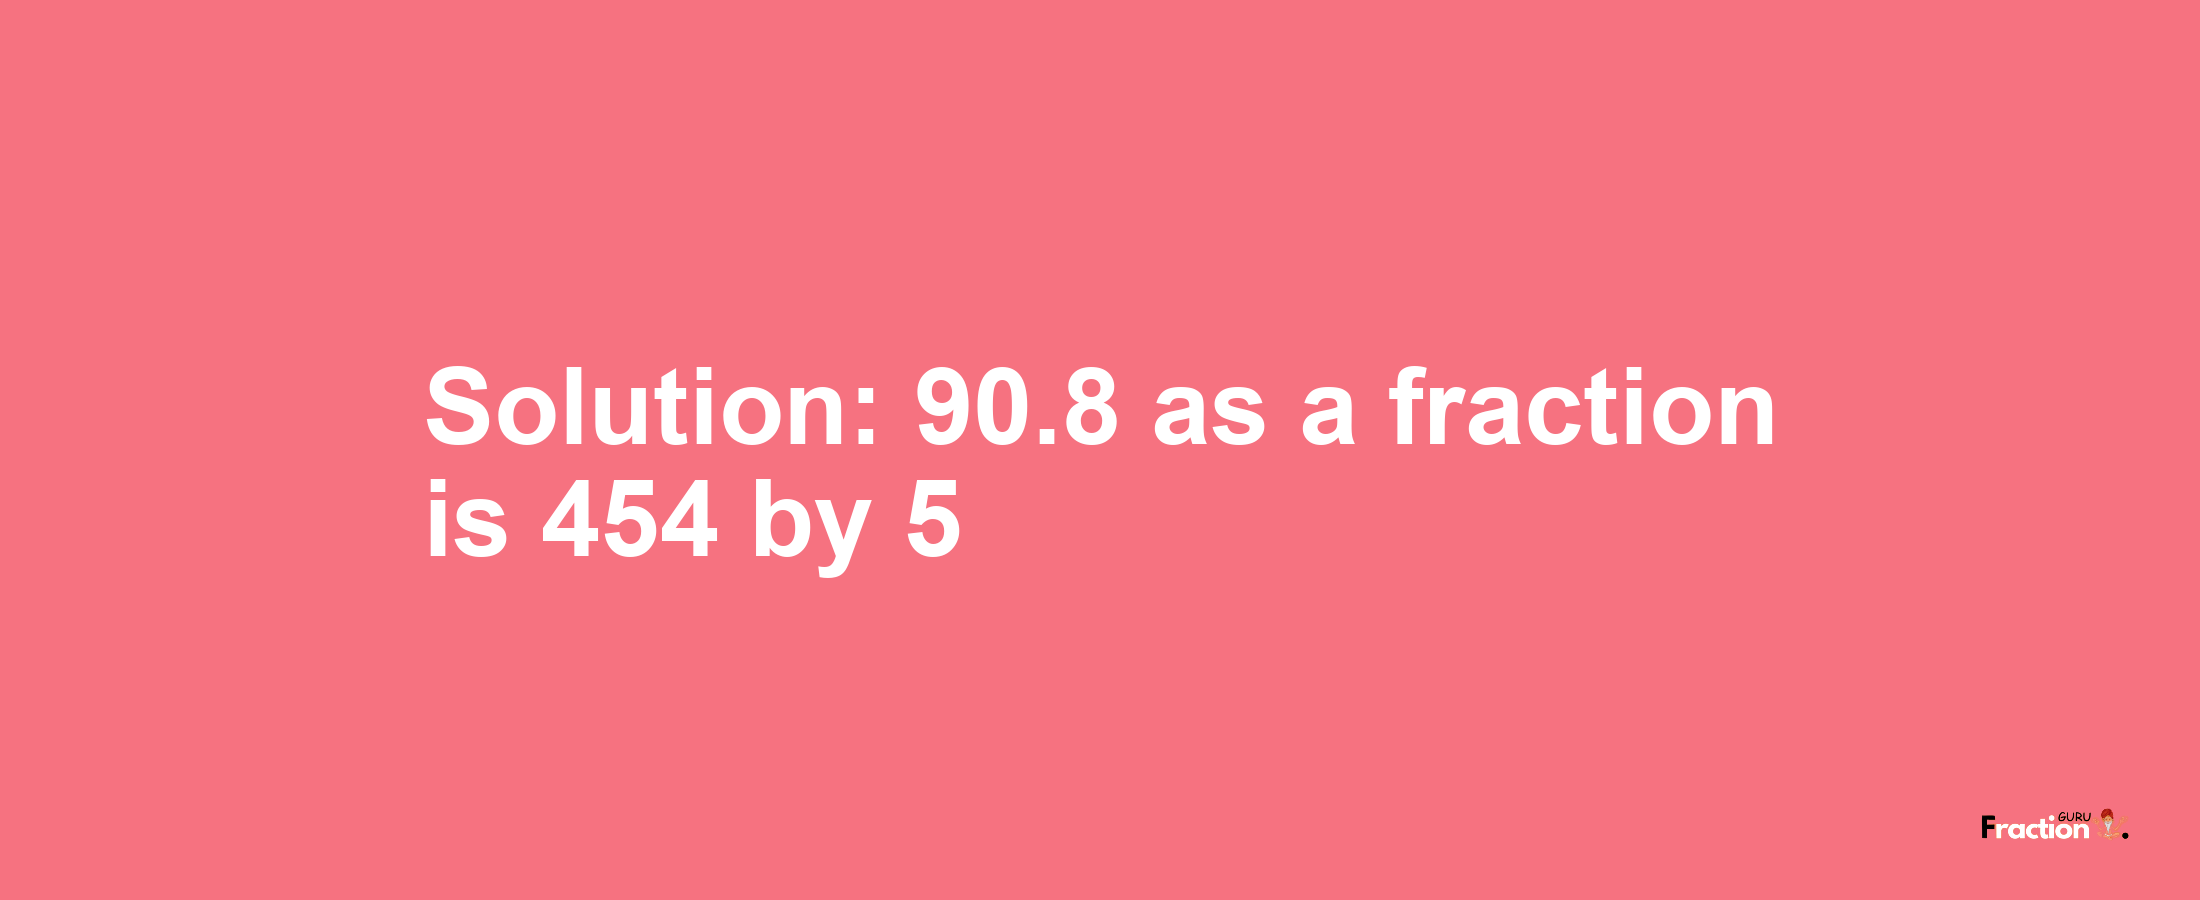 Solution:90.8 as a fraction is 454/5